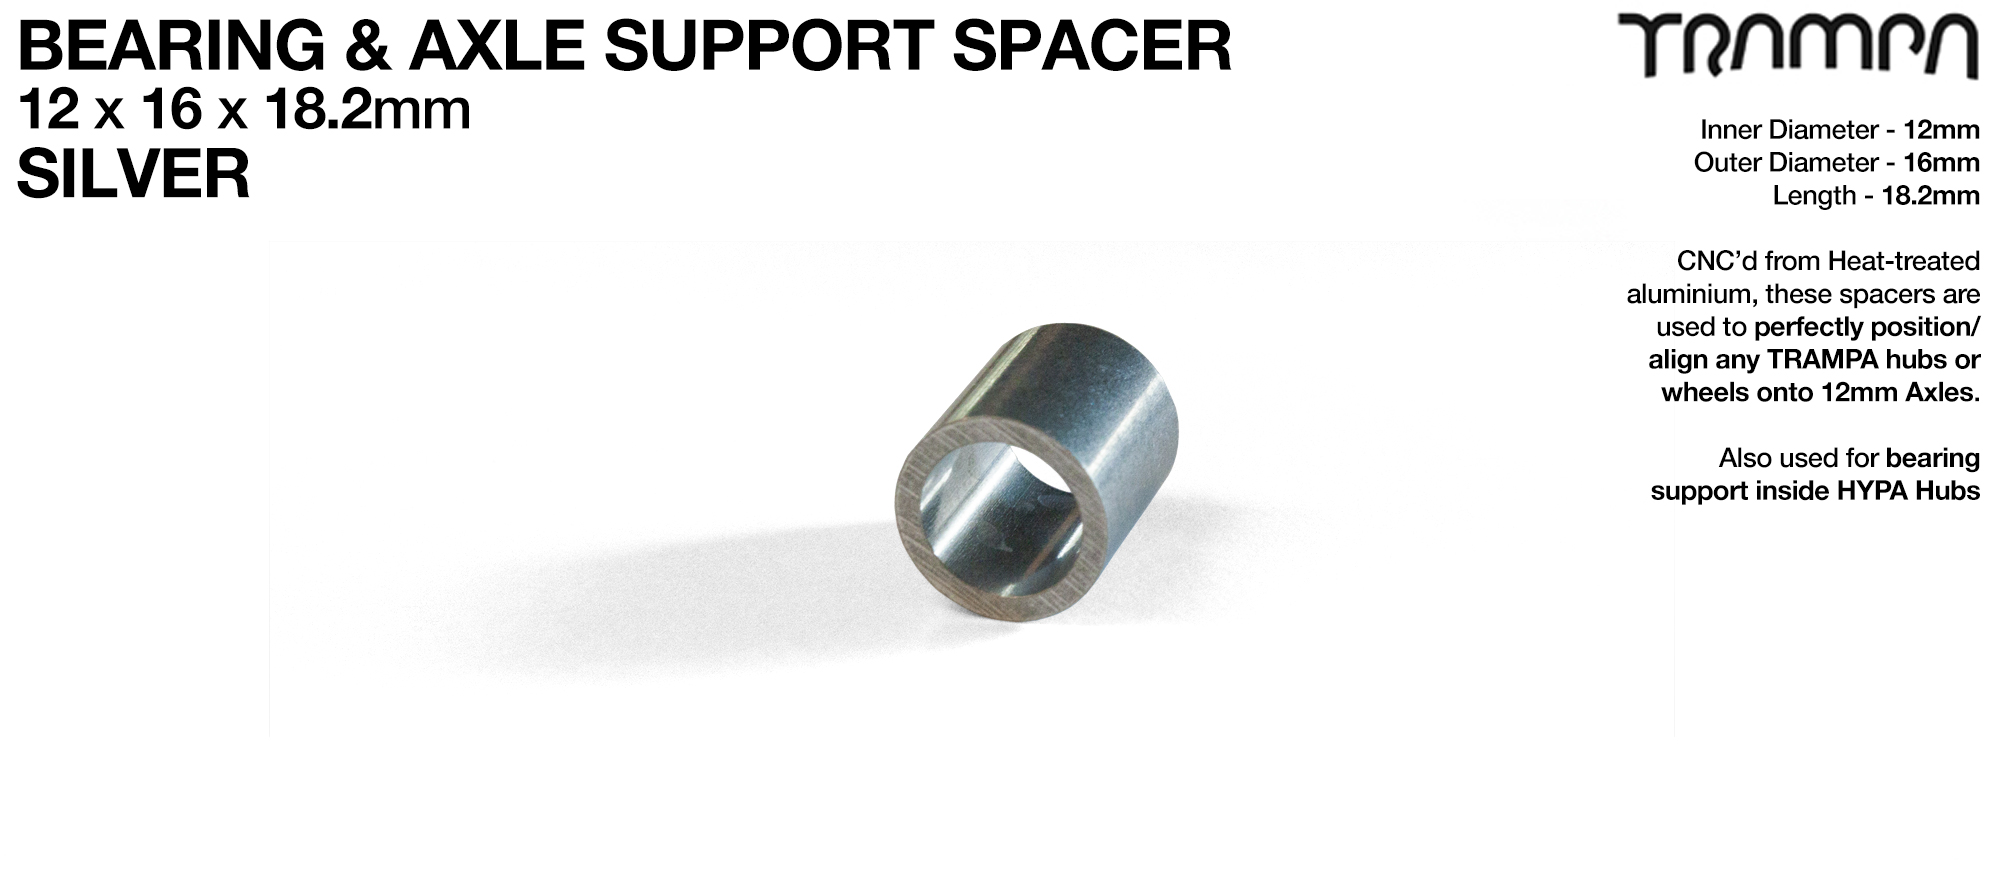 Wheel support spacer for all TRAMPA Wheels on 12mm ATB Axles - CNC precision 12mm x 16mm x 18.2mm - SILVER